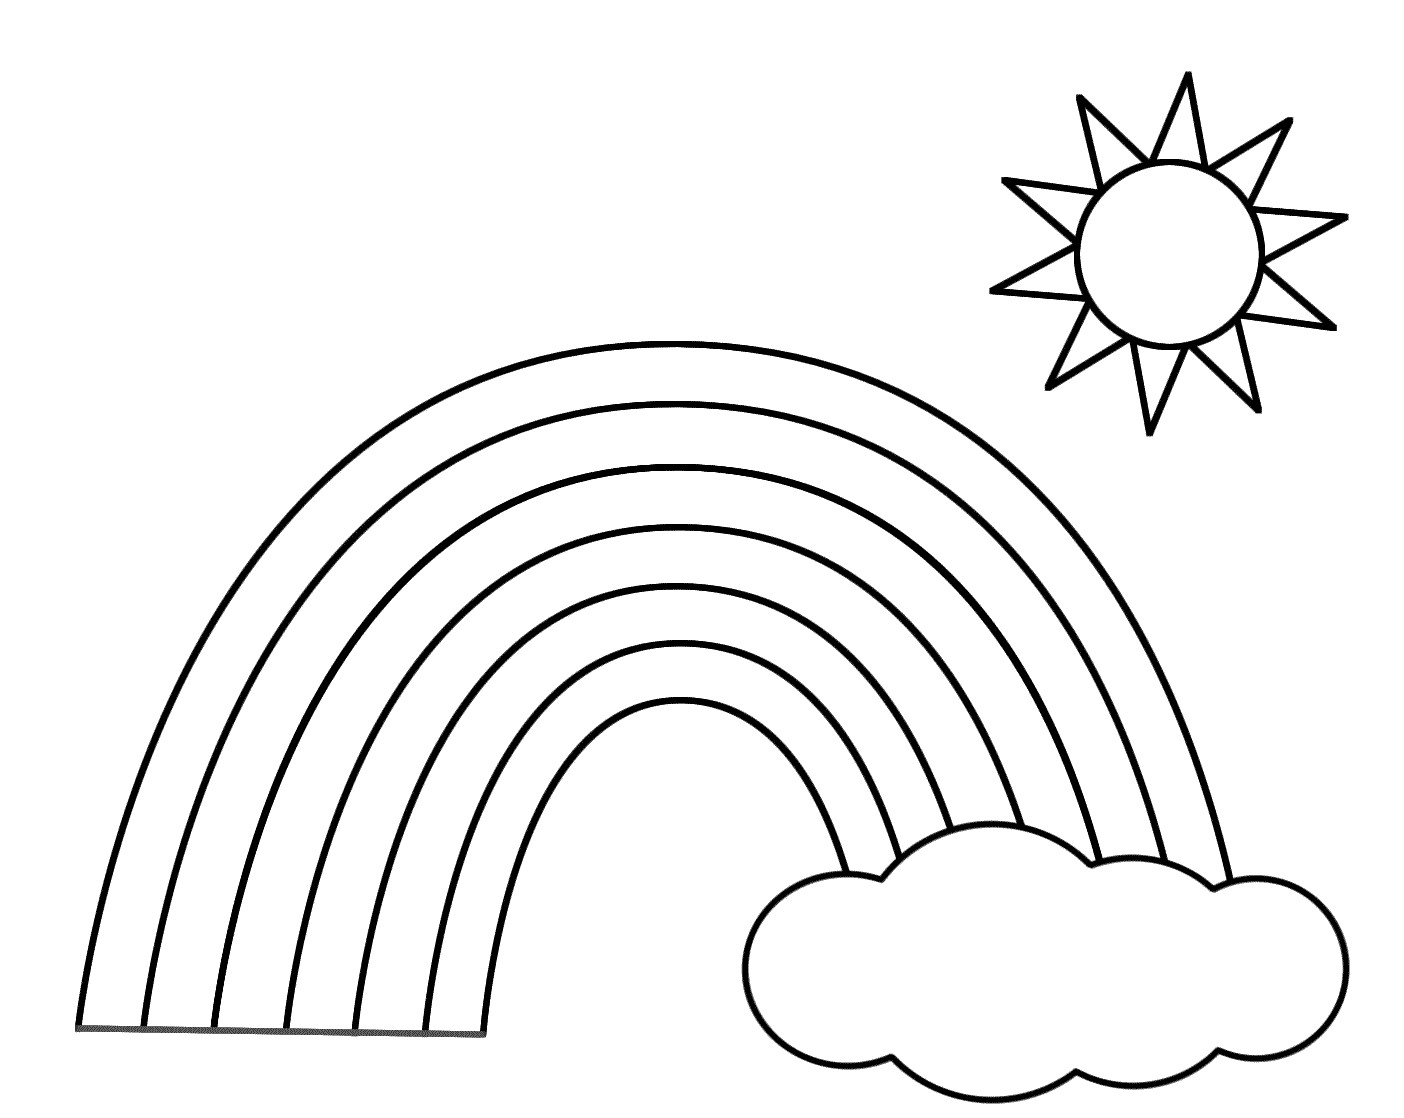 Rainbow Coloring Pages For Toddlers
 R is for Rainbow coloring page